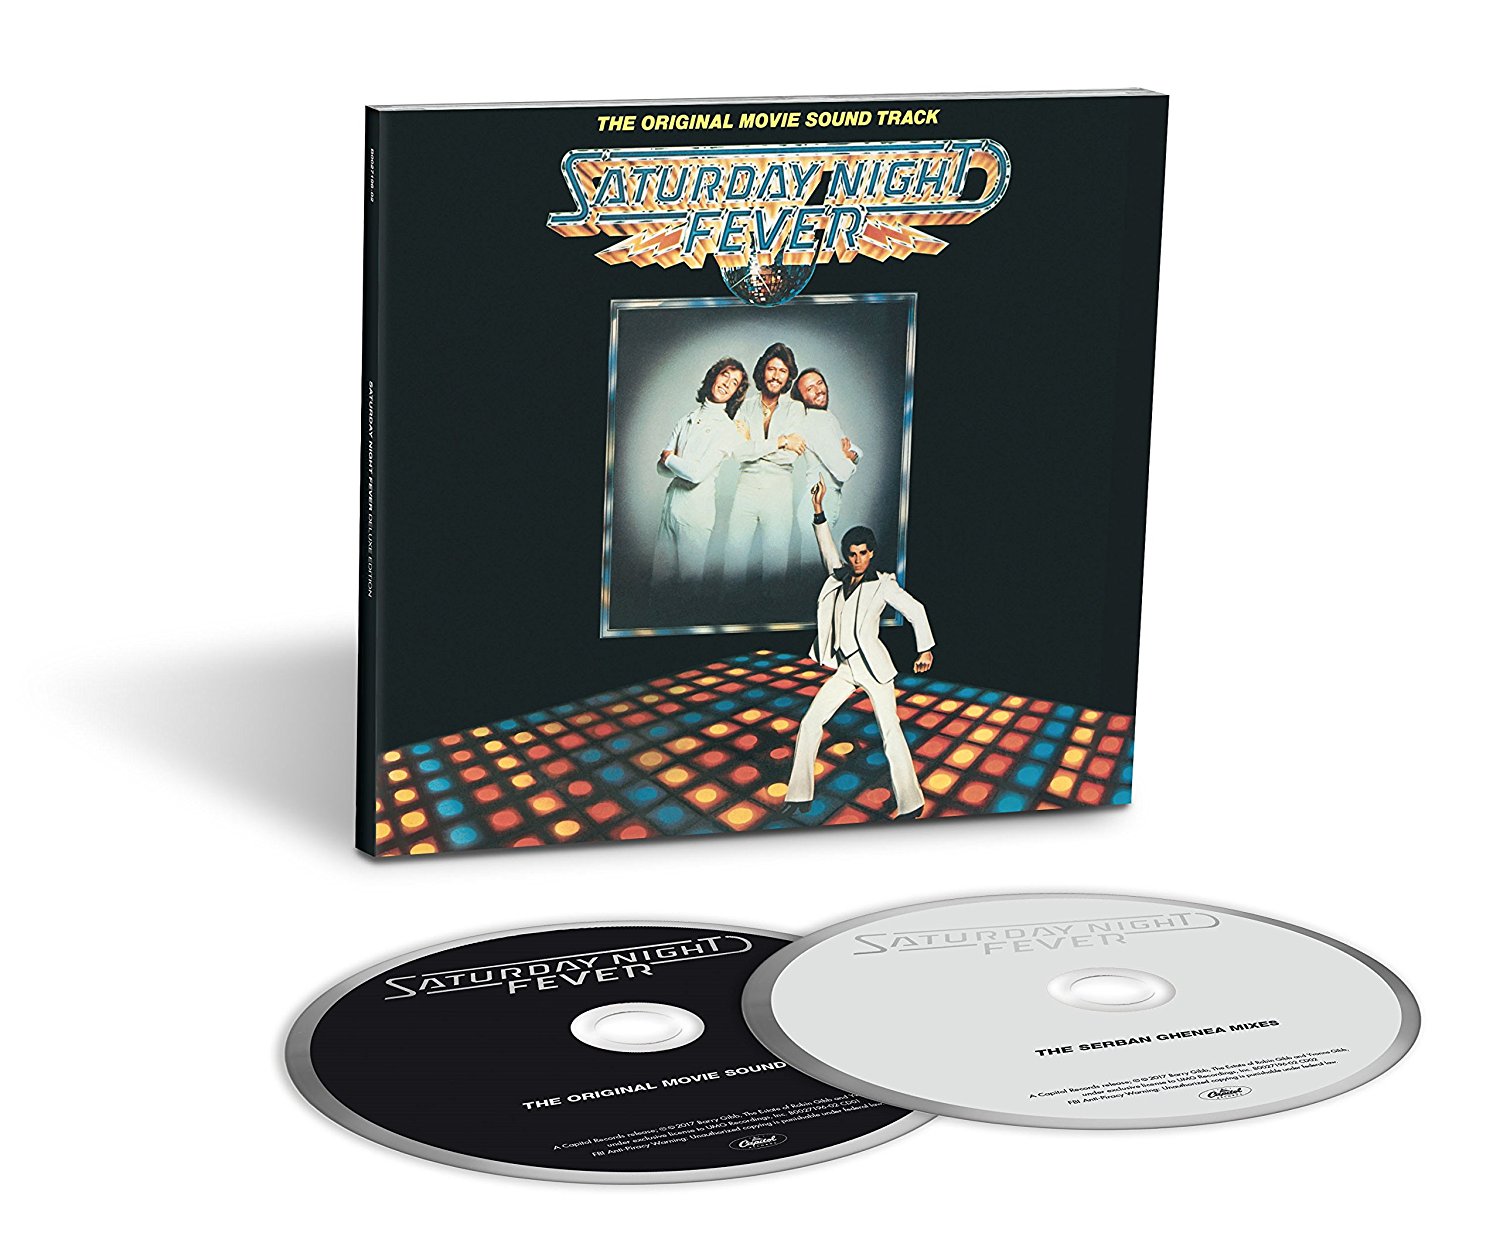 Saturday Night Fever (The Original Movie Soundtrack)’ Celebrated With Special 40th Anniversary Edition Releases